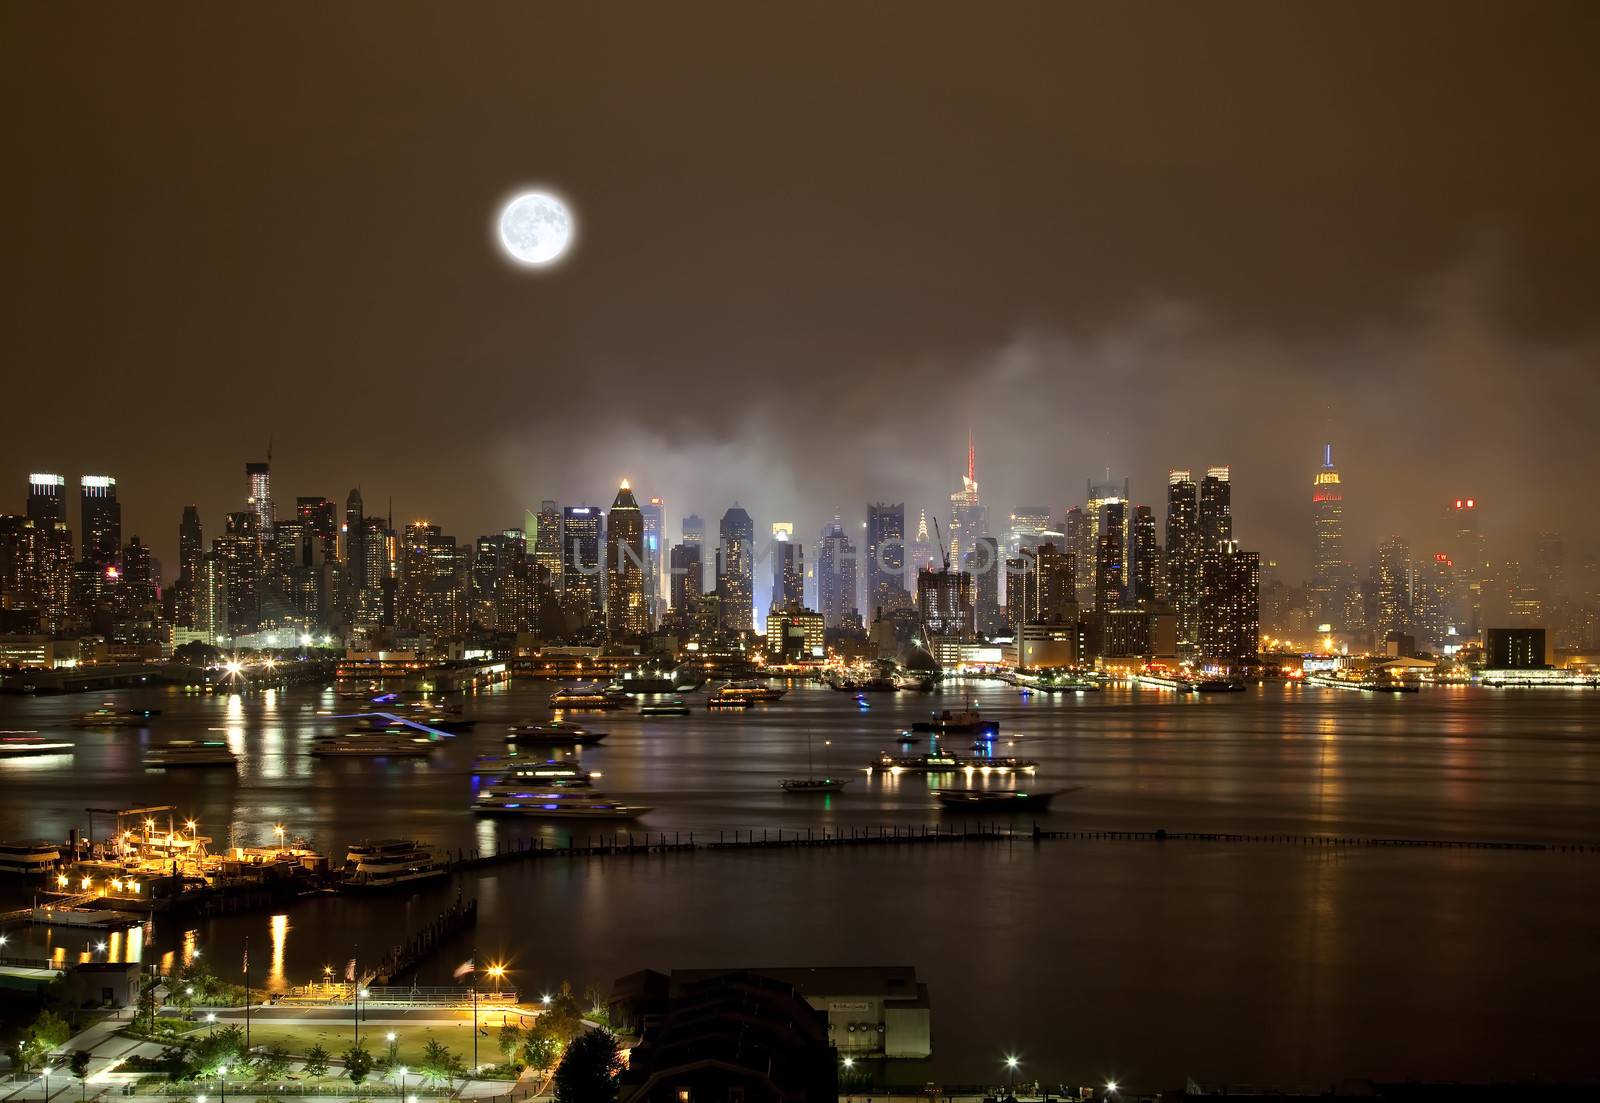 The New York City Skyline right after the July 4th firework